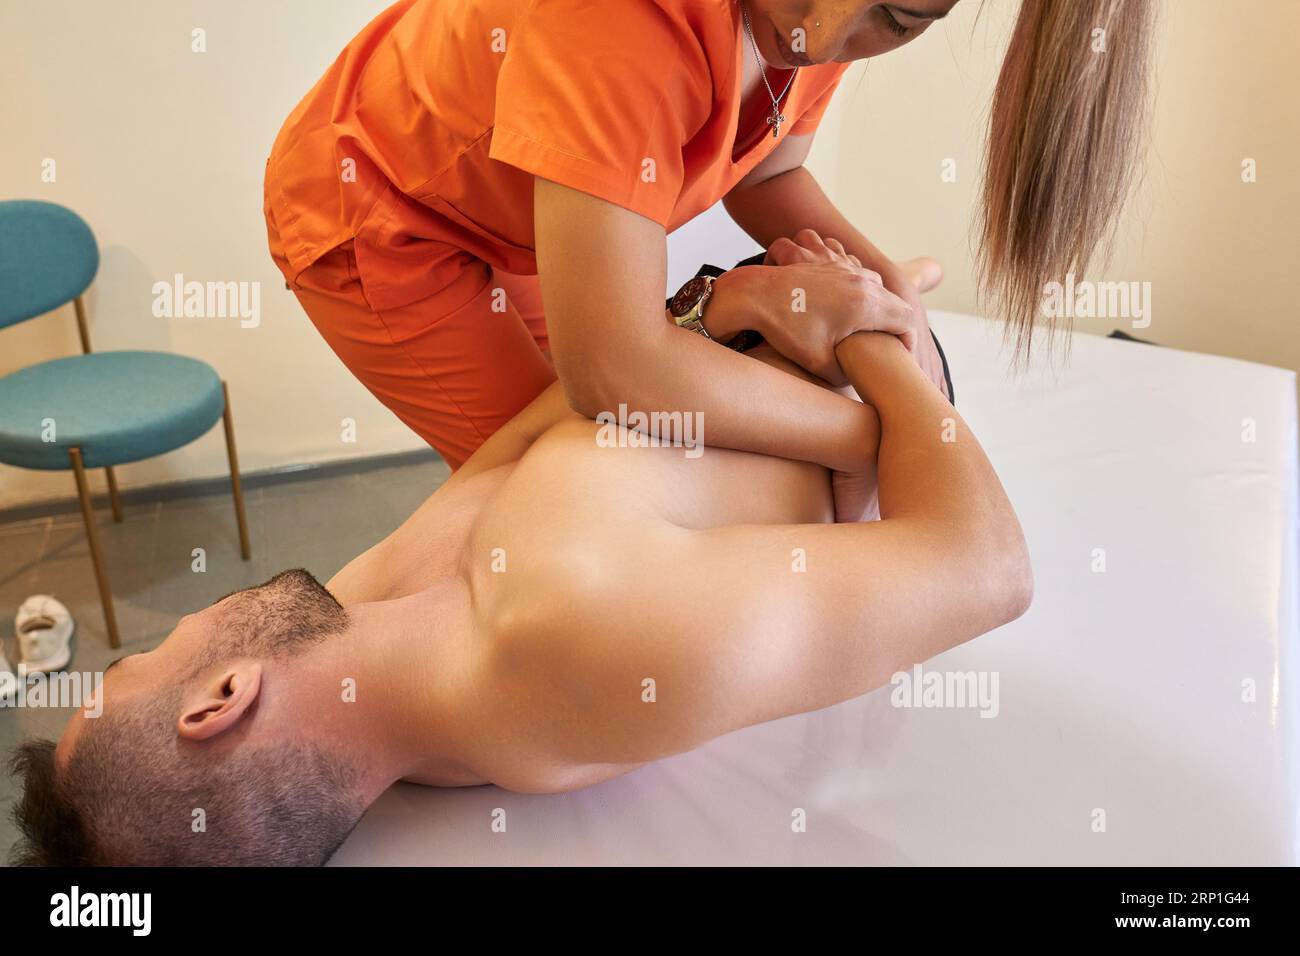 Female doctor readjusting a male patient's lumbar spine Stock Photo